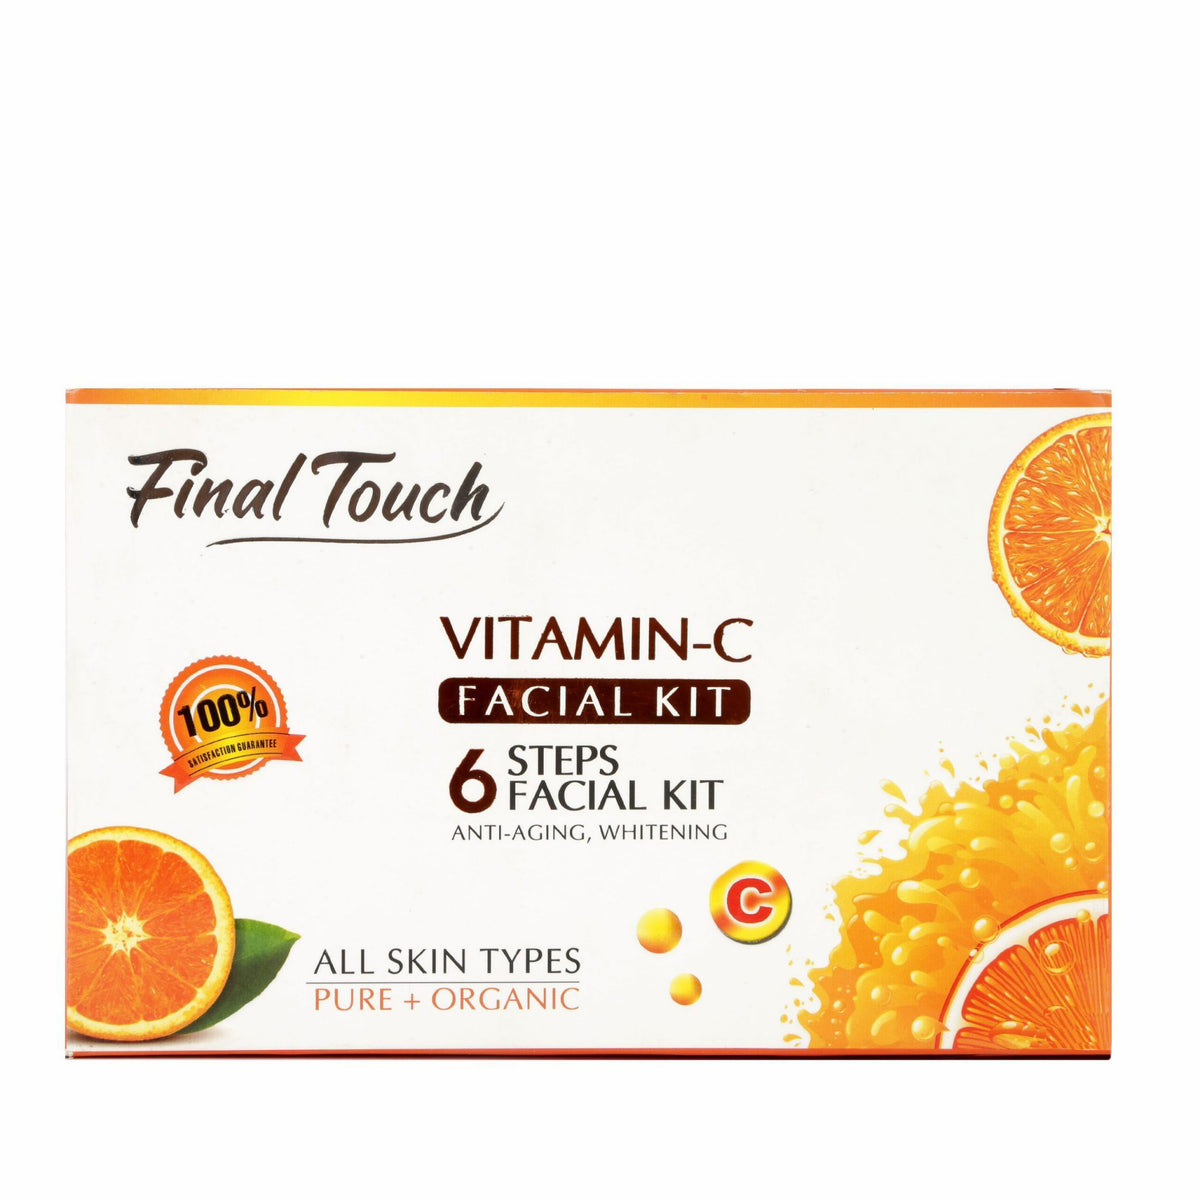 Final Touch Vitamin C 6 Steps Faical Kit - For All Skin Types freeshipping - lasertag.pk